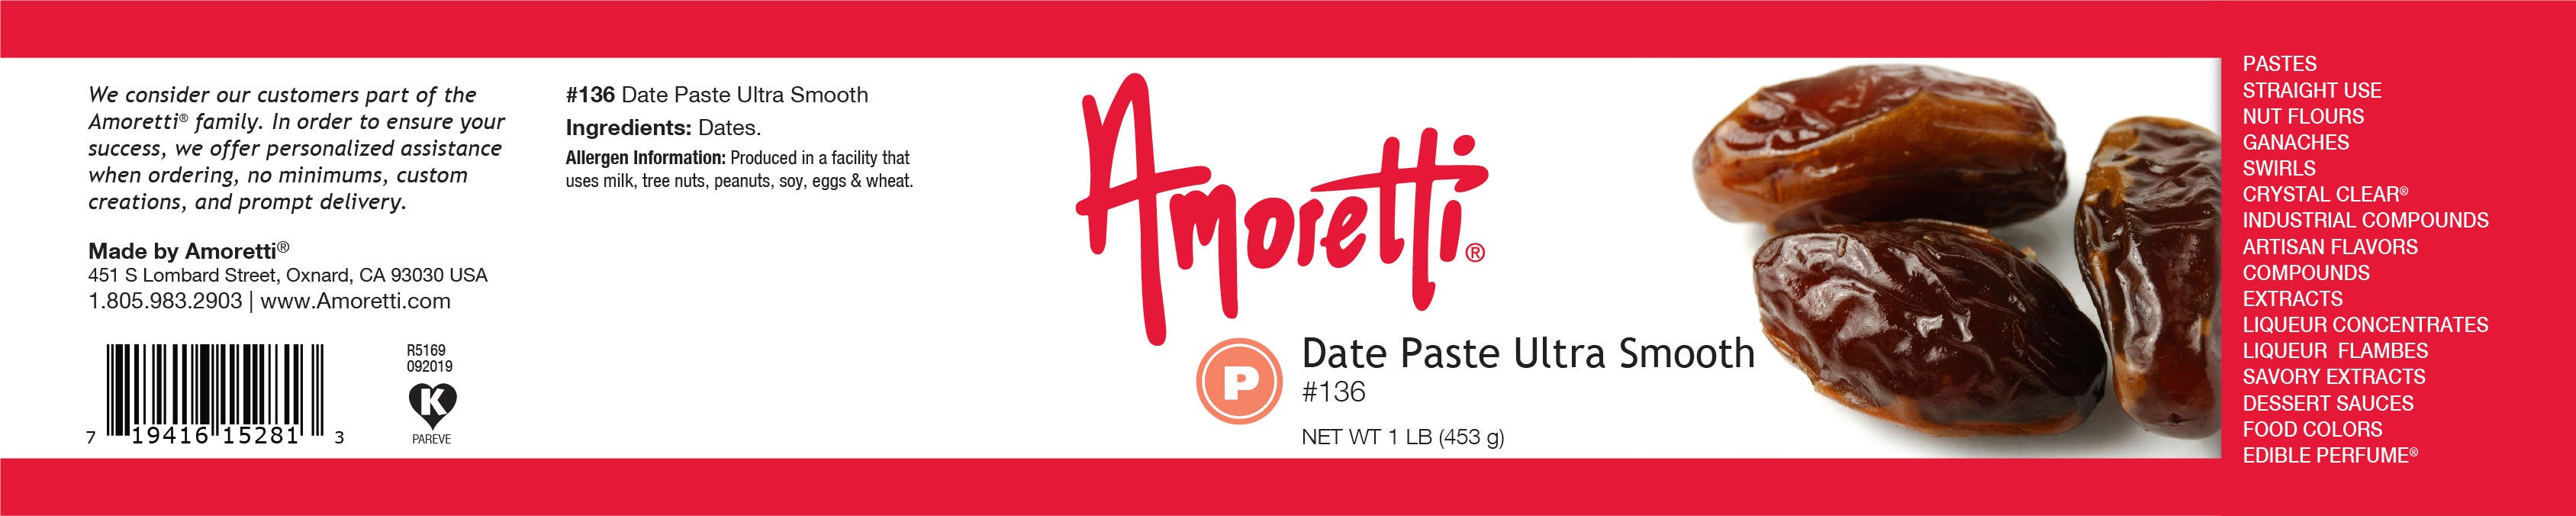 Date Paste Ultra Smooth